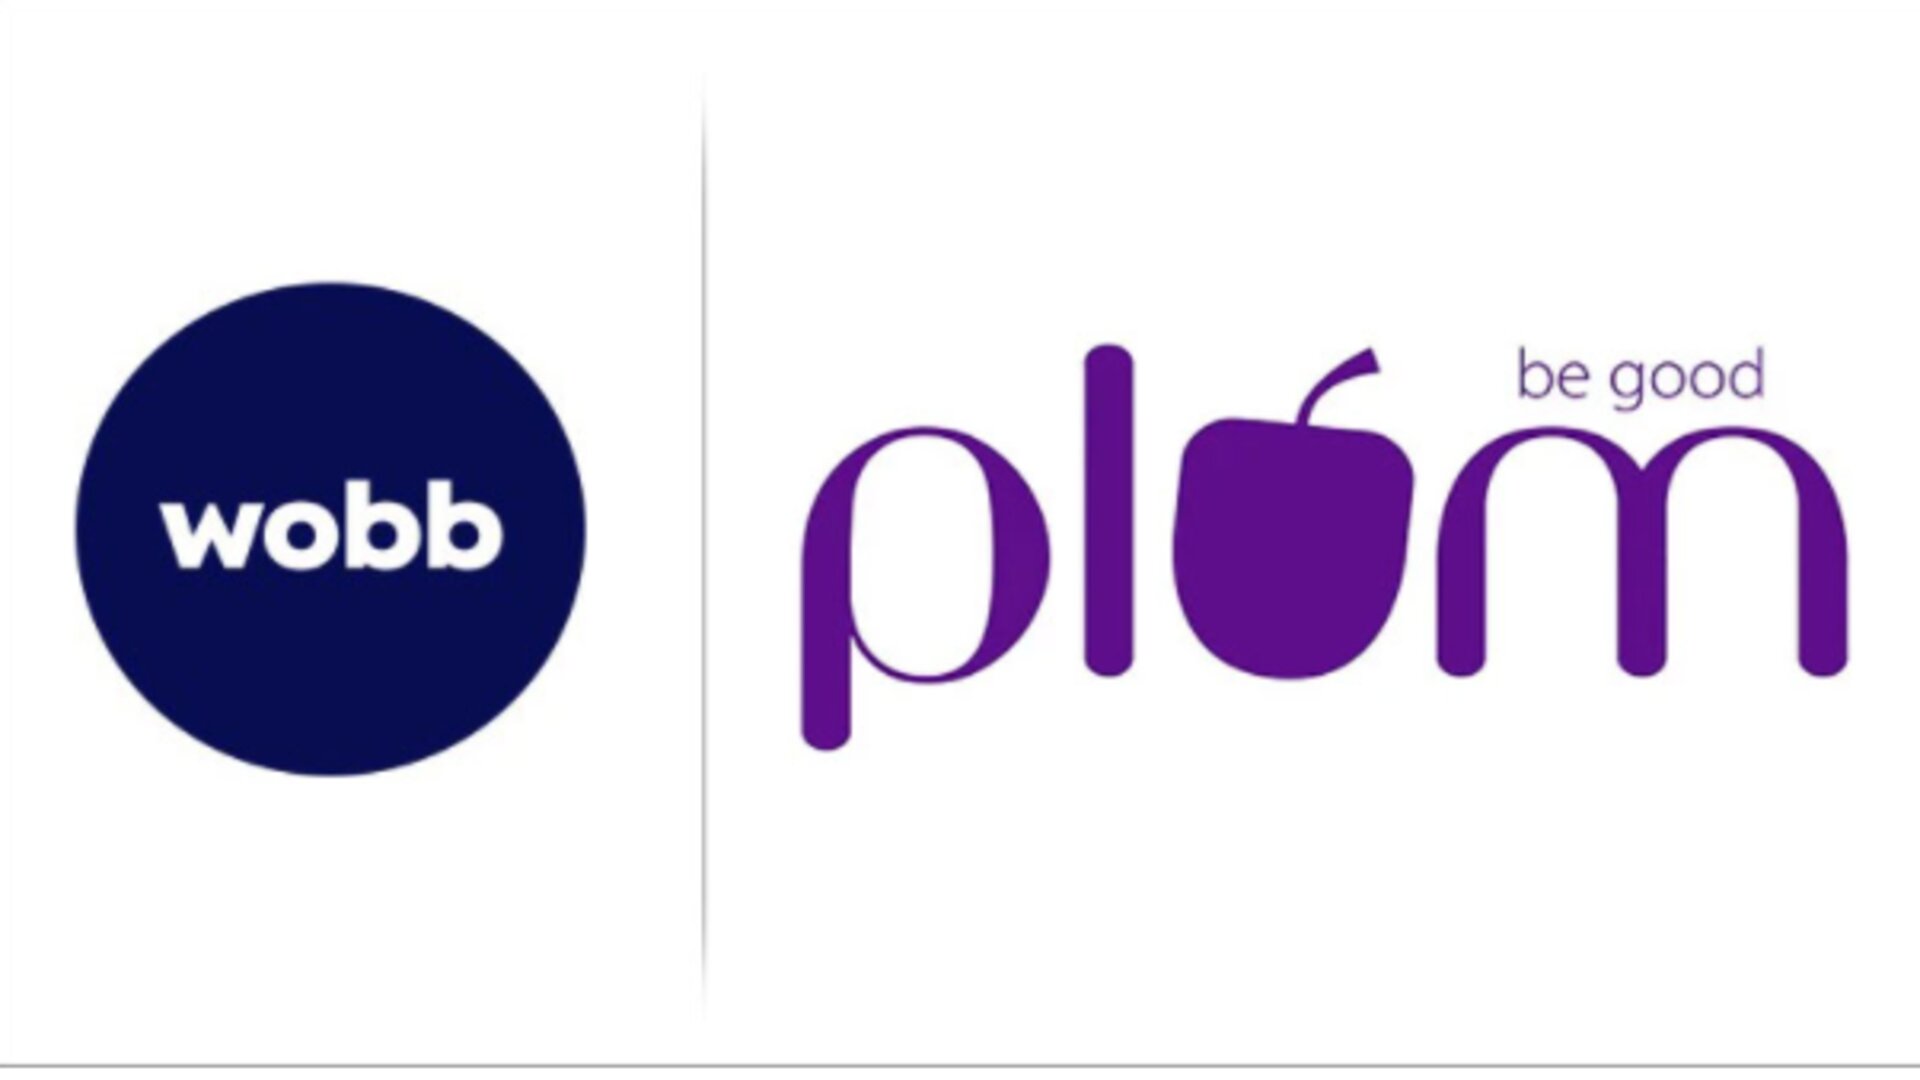 Wobb engages 1000 influencers to build beauty brand “Plum”